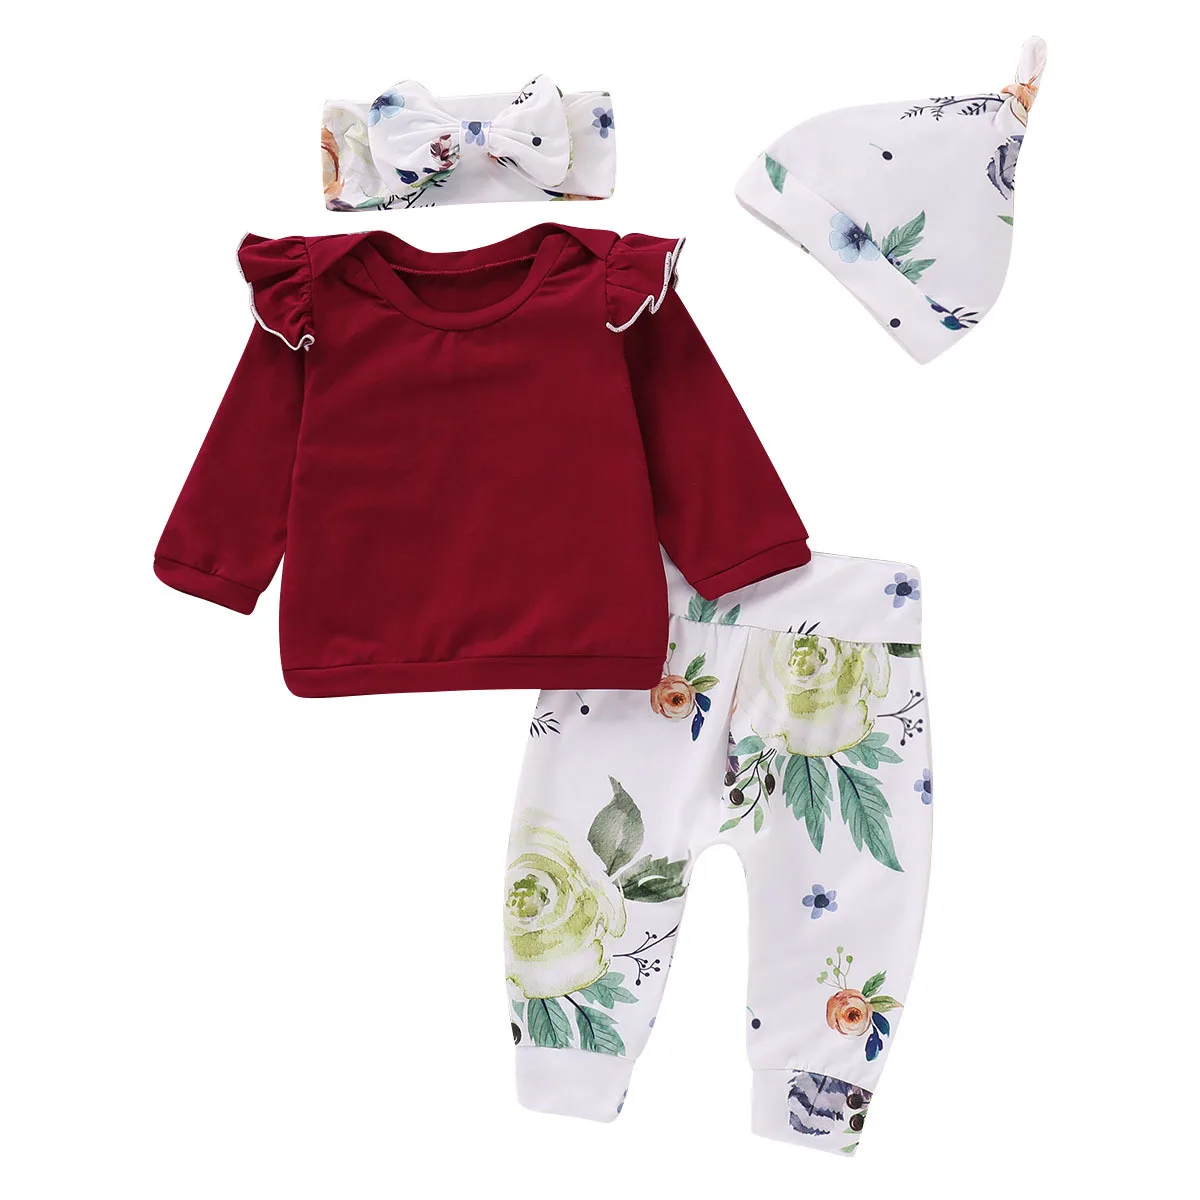 

1171 Newborn Toddler Baby Girls Tracksuits Clothes Sets Long Sleeve Tops+Flower Print Long Pants 2pcs Clothing Sports Outfit Set, Picture shows